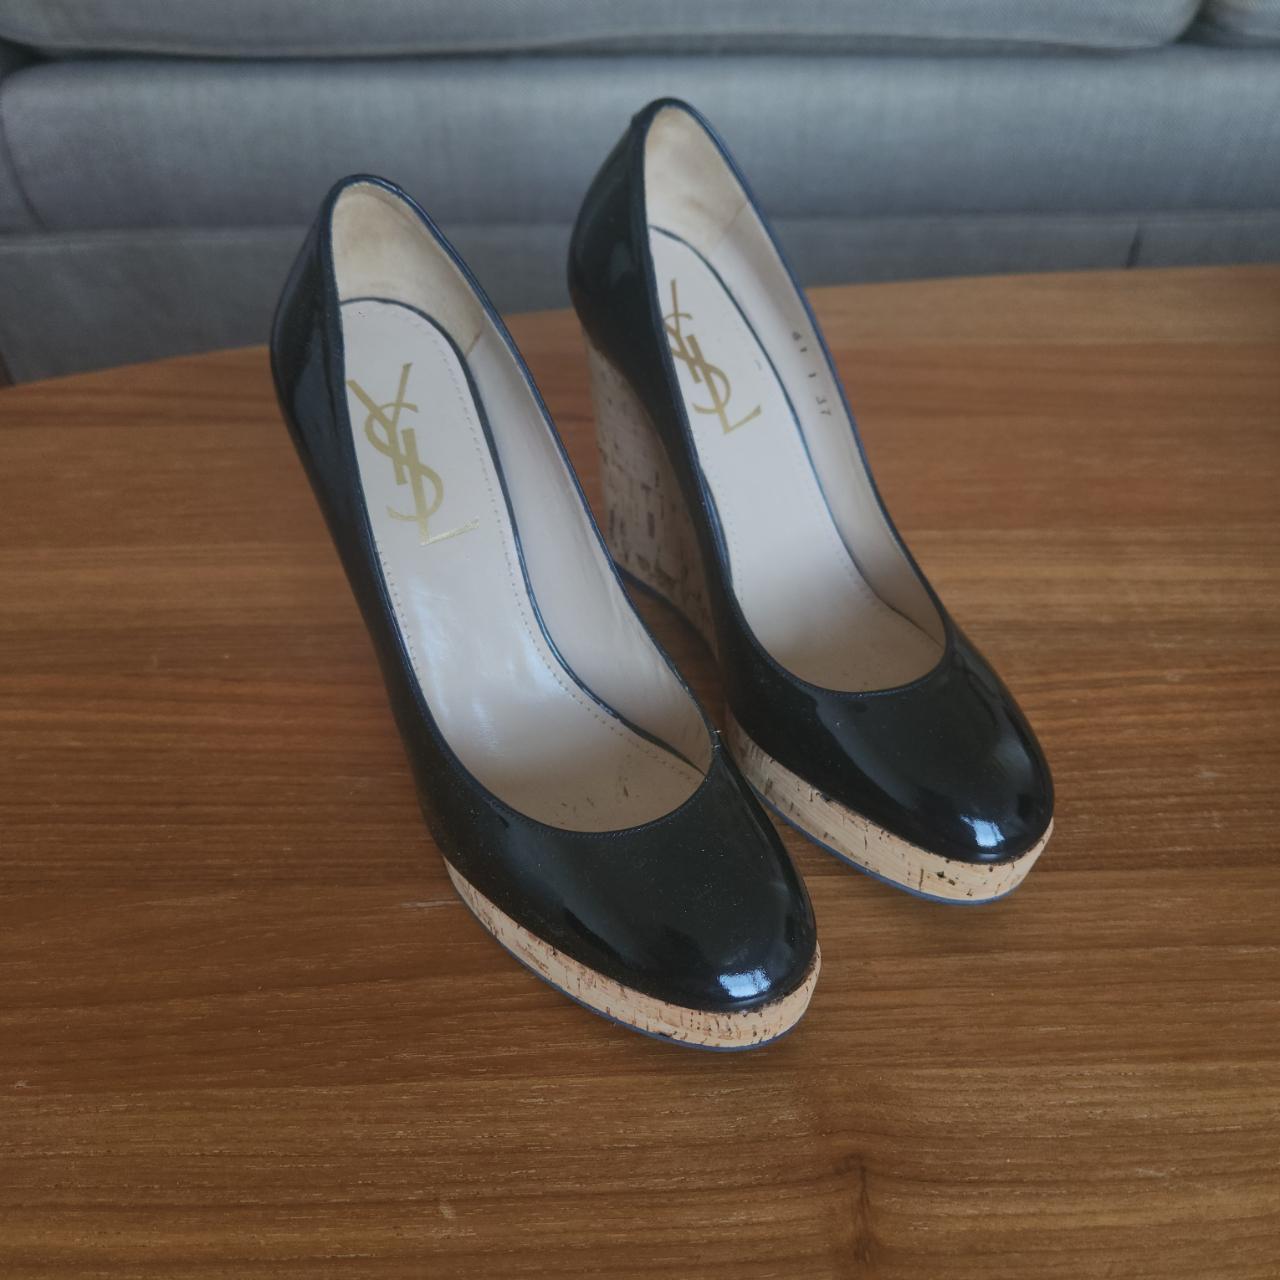 This is a pair of vintage YSL patent leather cork... - Depop